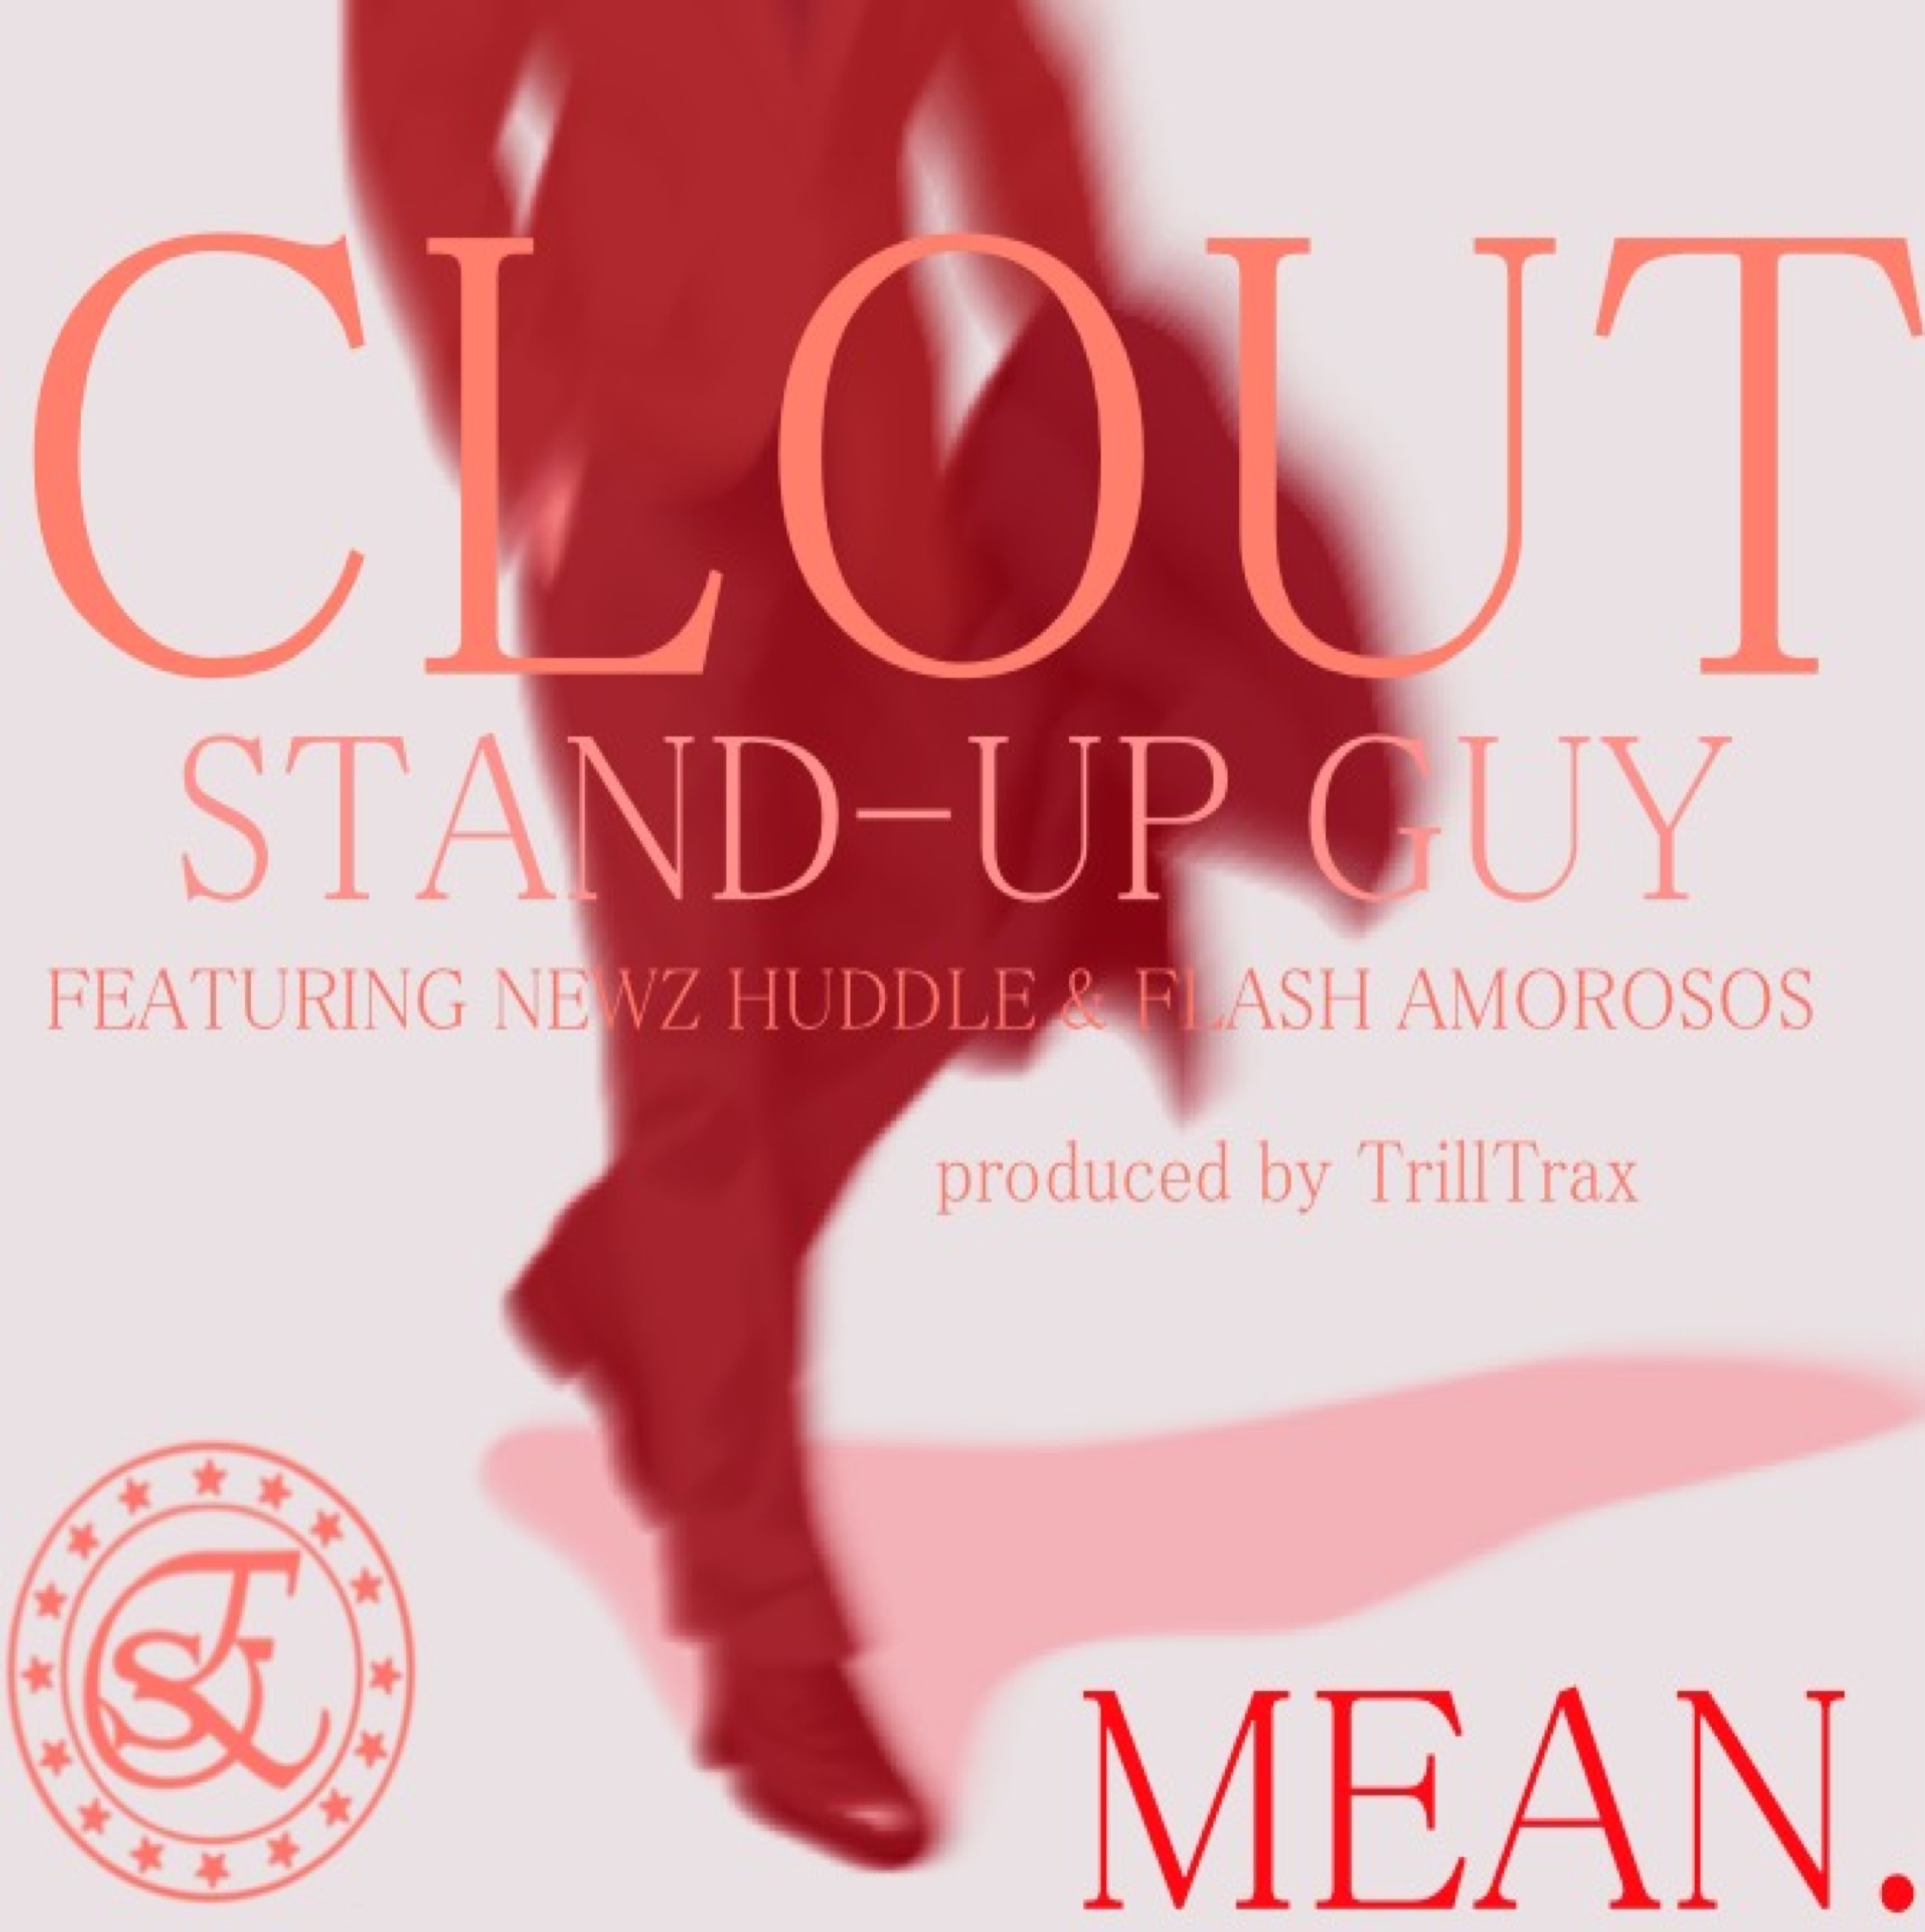 standupguycover Clout - Stand Up Guy Ft. Flash Amorosos & Newz Huddle  